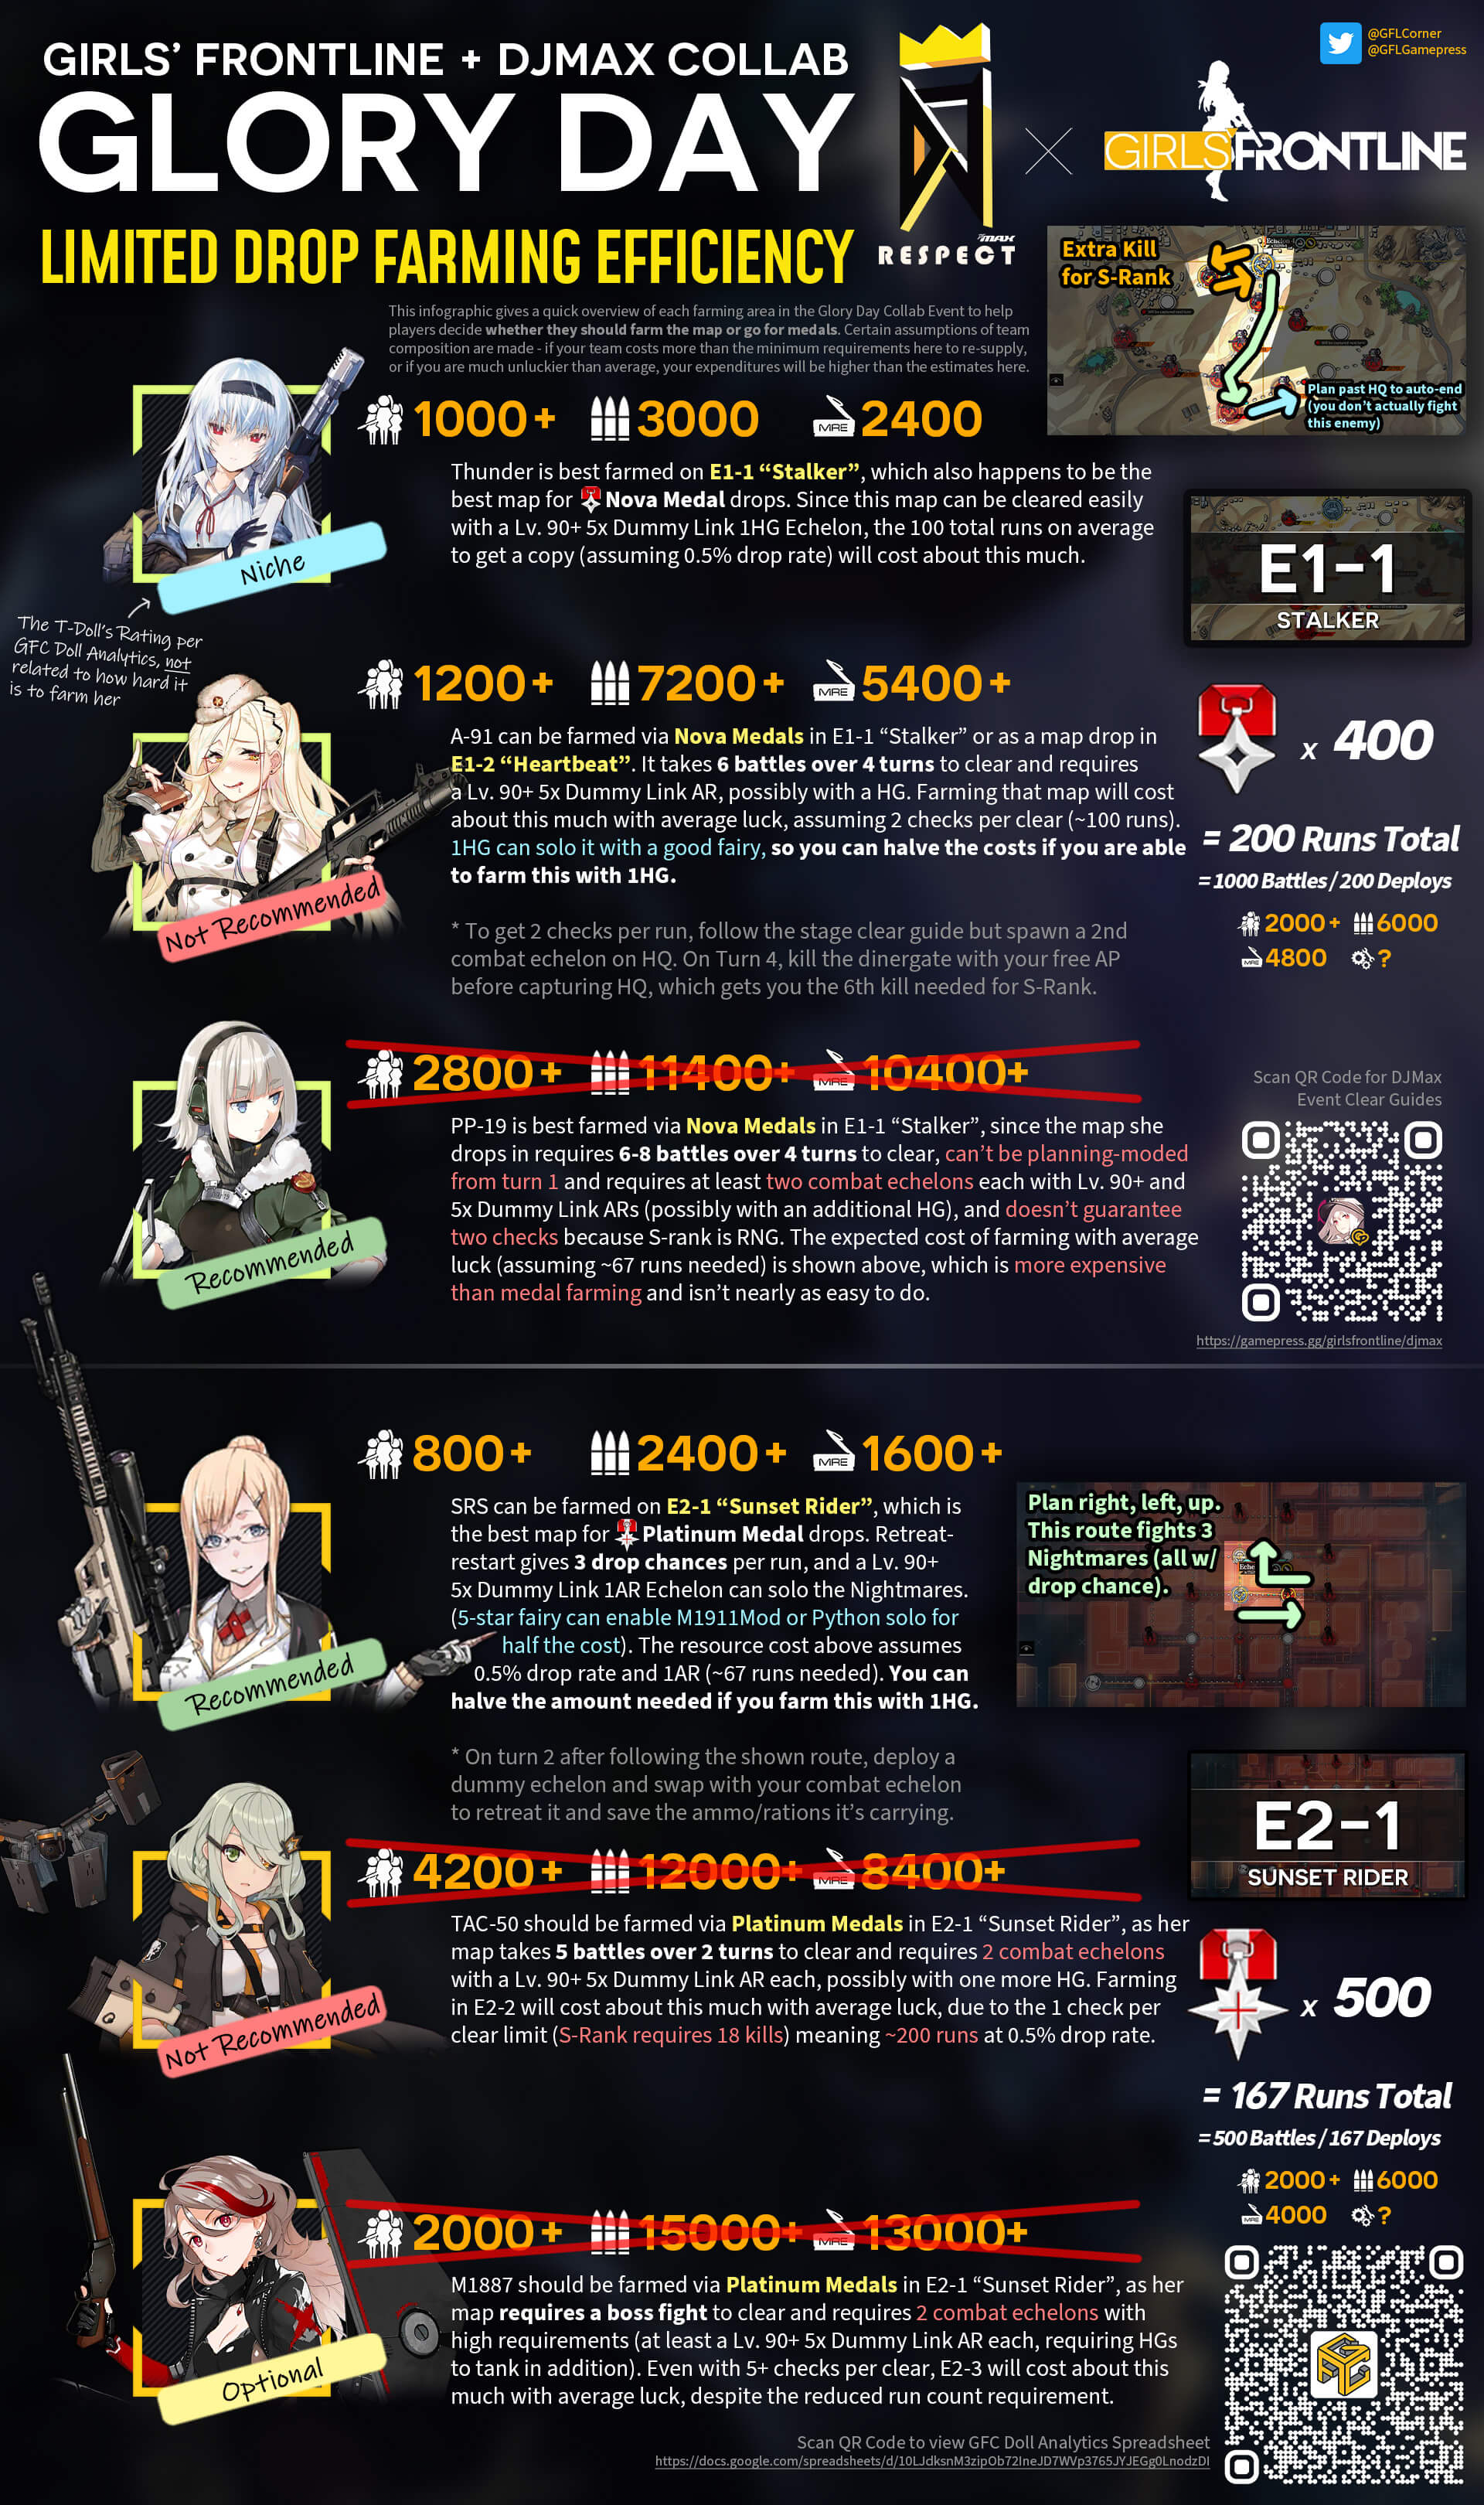 Updated infographic for the Glory Day Drop Farming Efficiency explanation